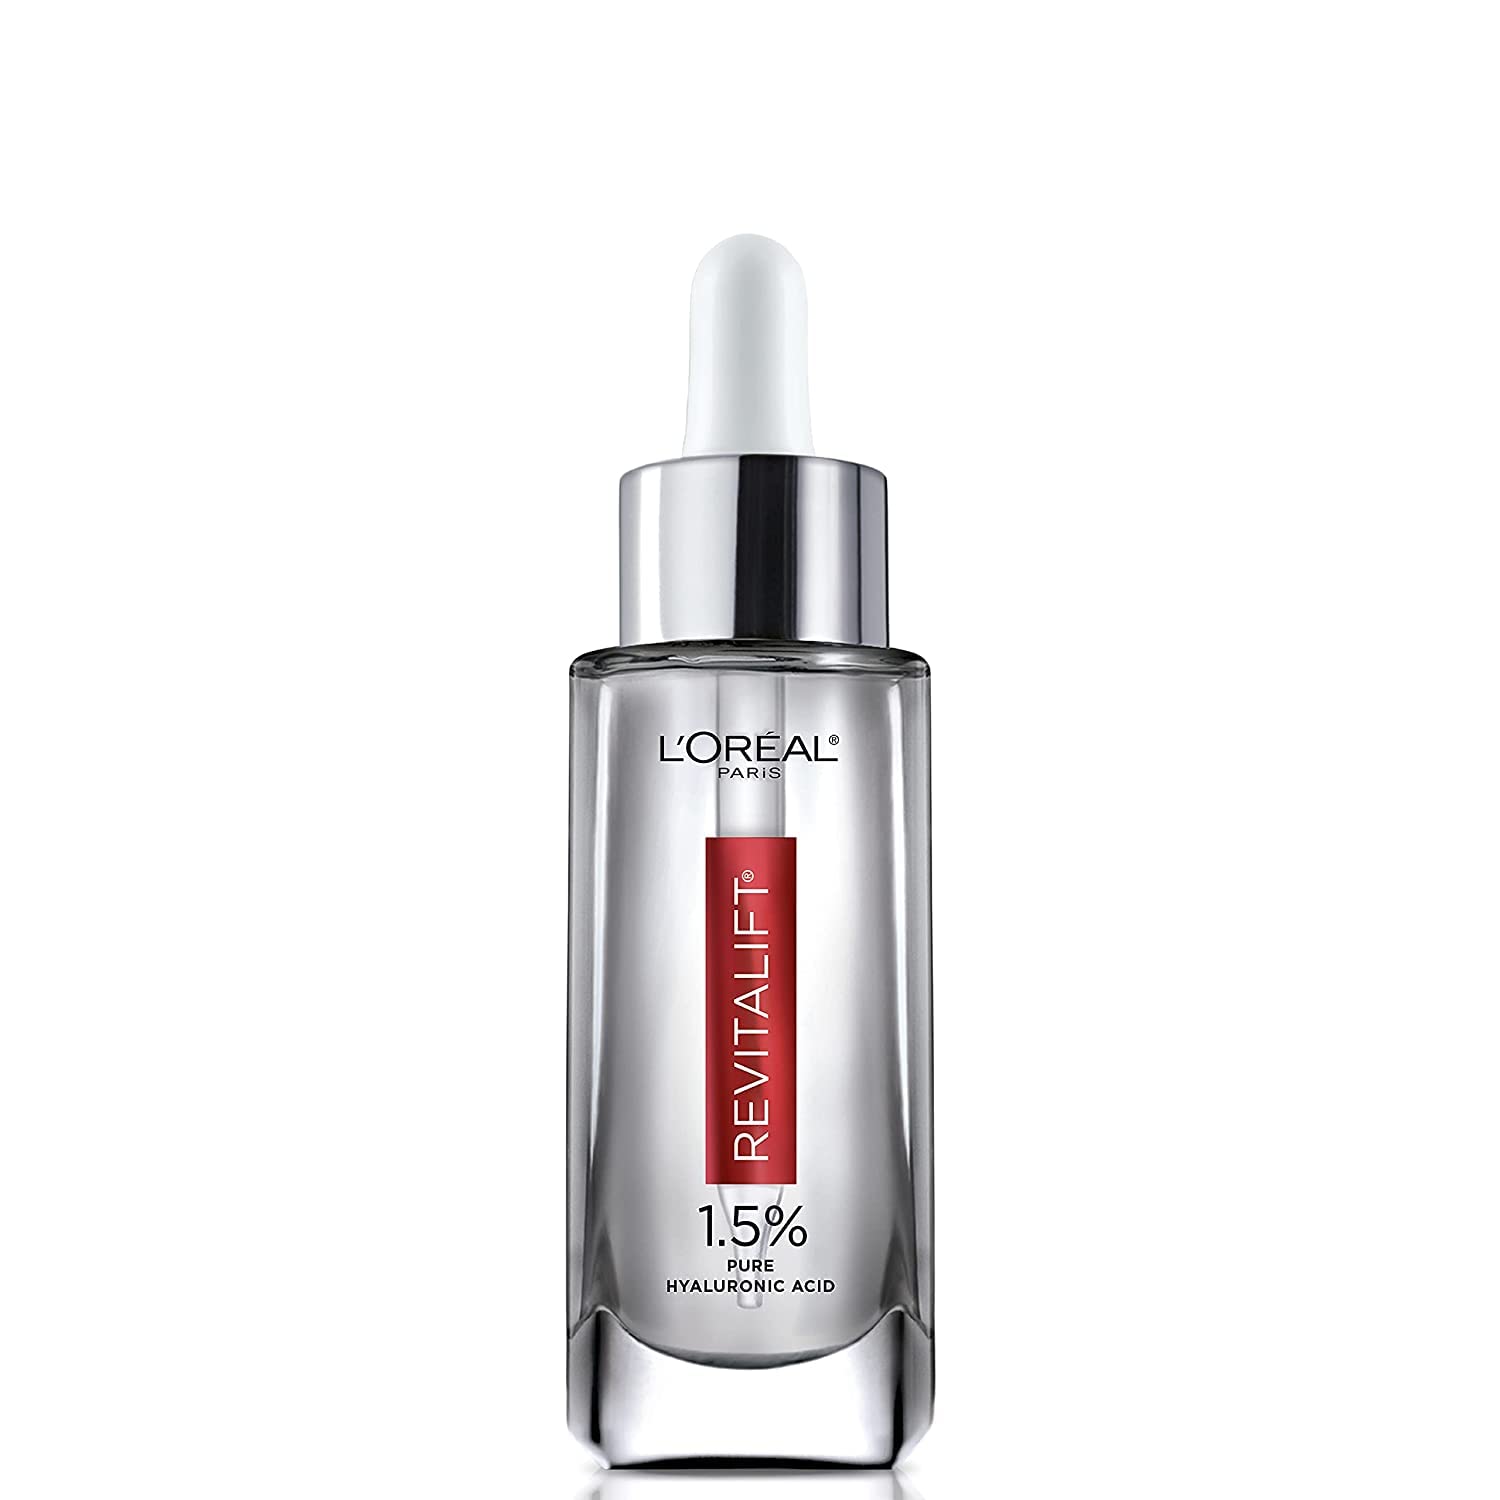 L’Oreal Paris 1.5% Pure Hyaluronic Acid Serum for Face with Vitamin C